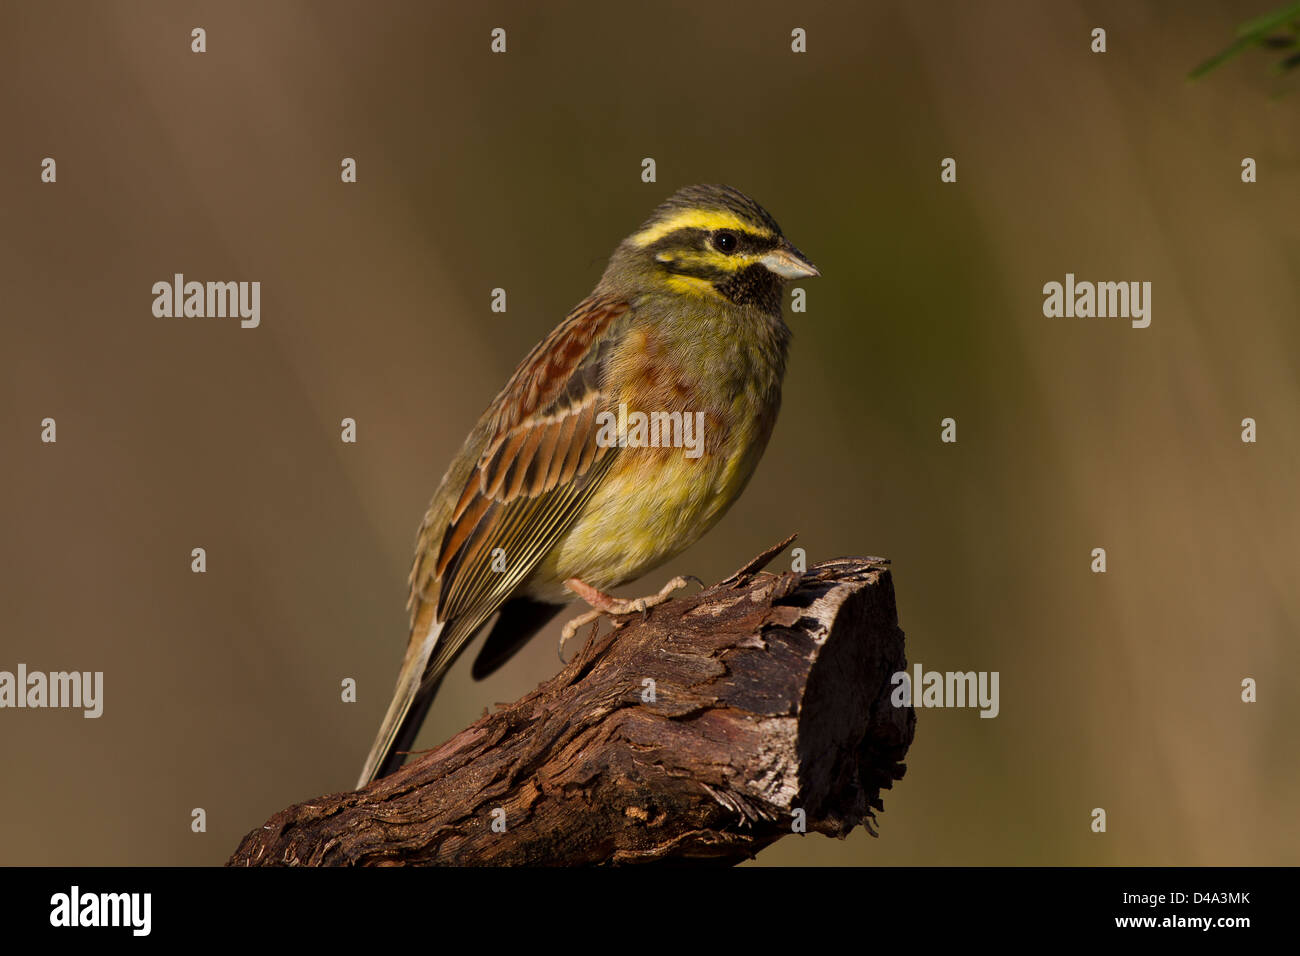 Male Cirl Bunting on the perch Stock Photo